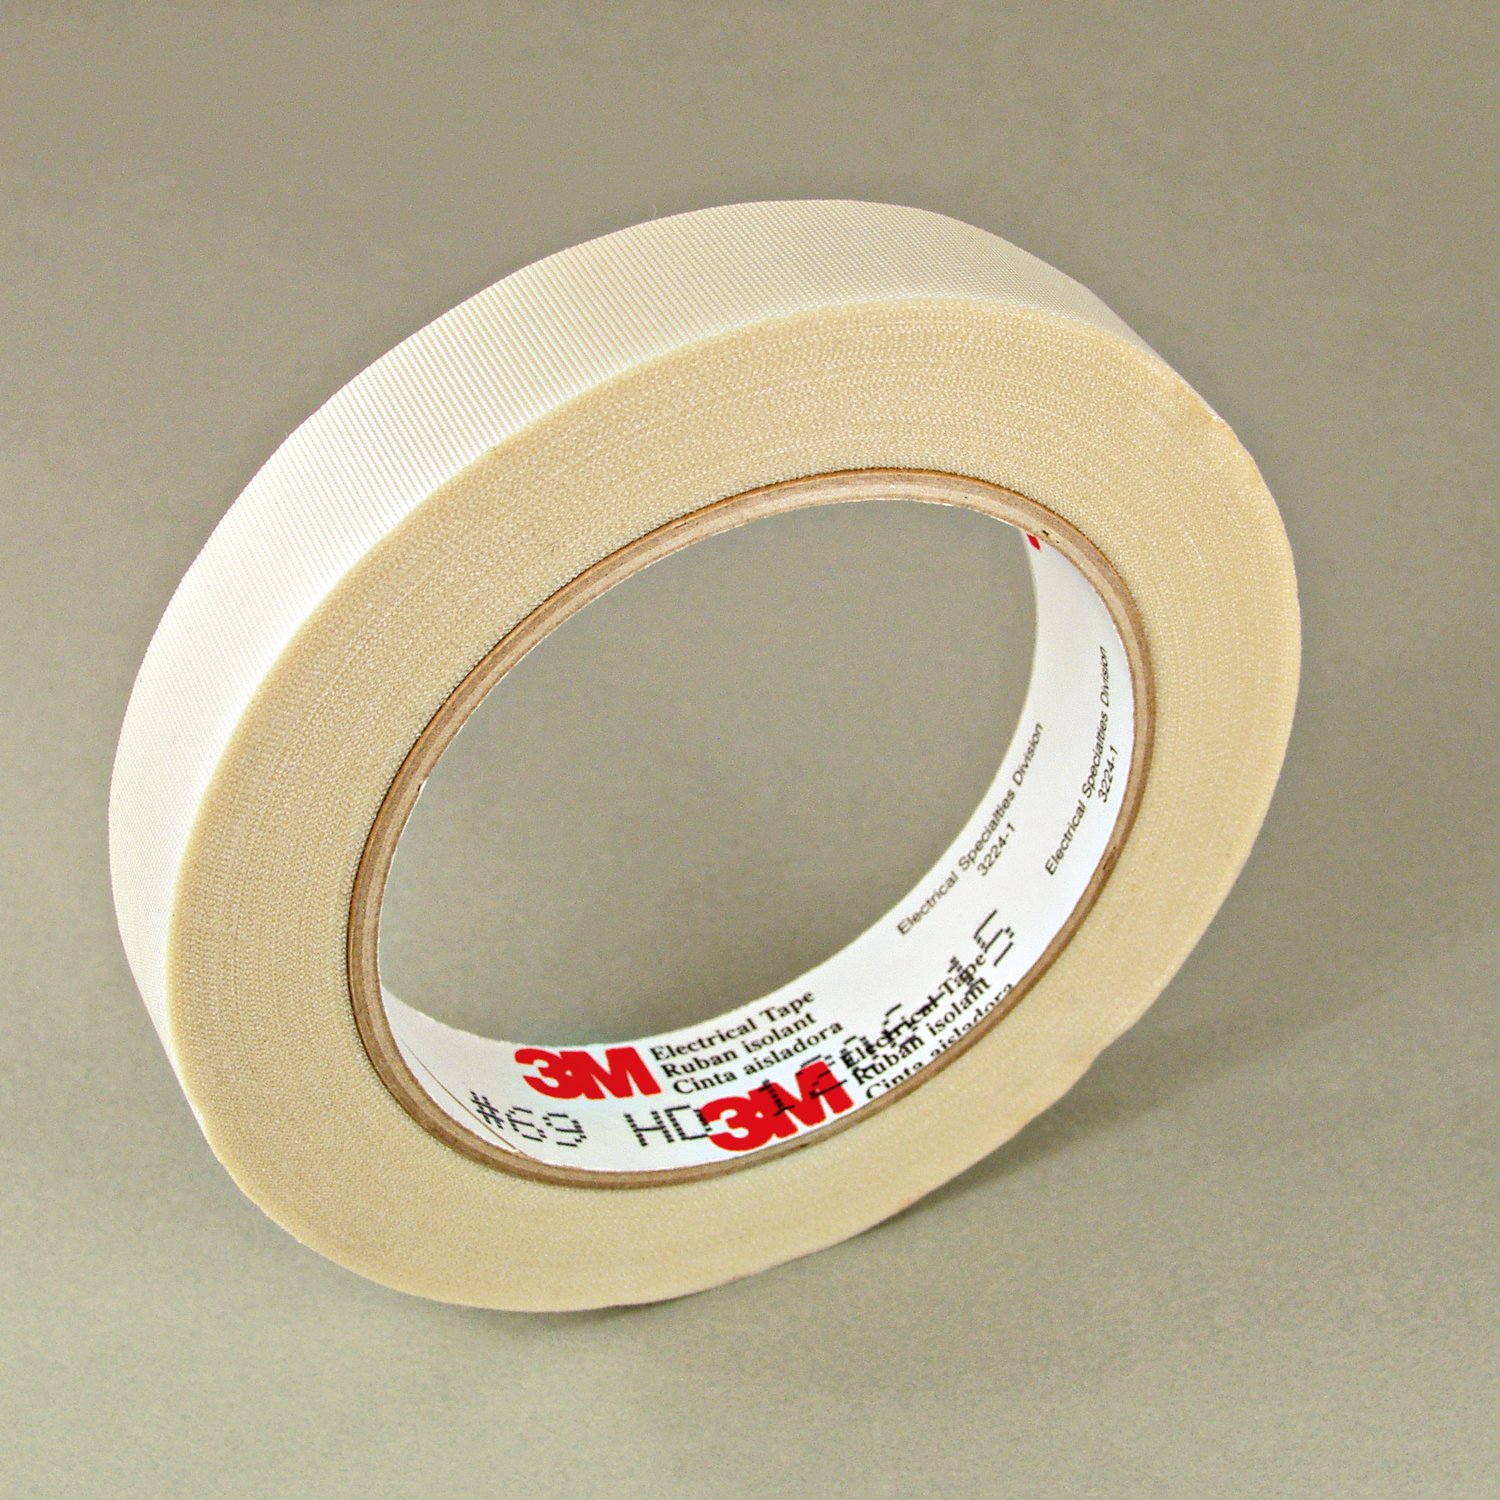 5/8" 3M 69 Glass Cloth Electrical Tape (3M69) with Silicone Adhesive 180°C, white, 5/8" wide x  36 YD roll